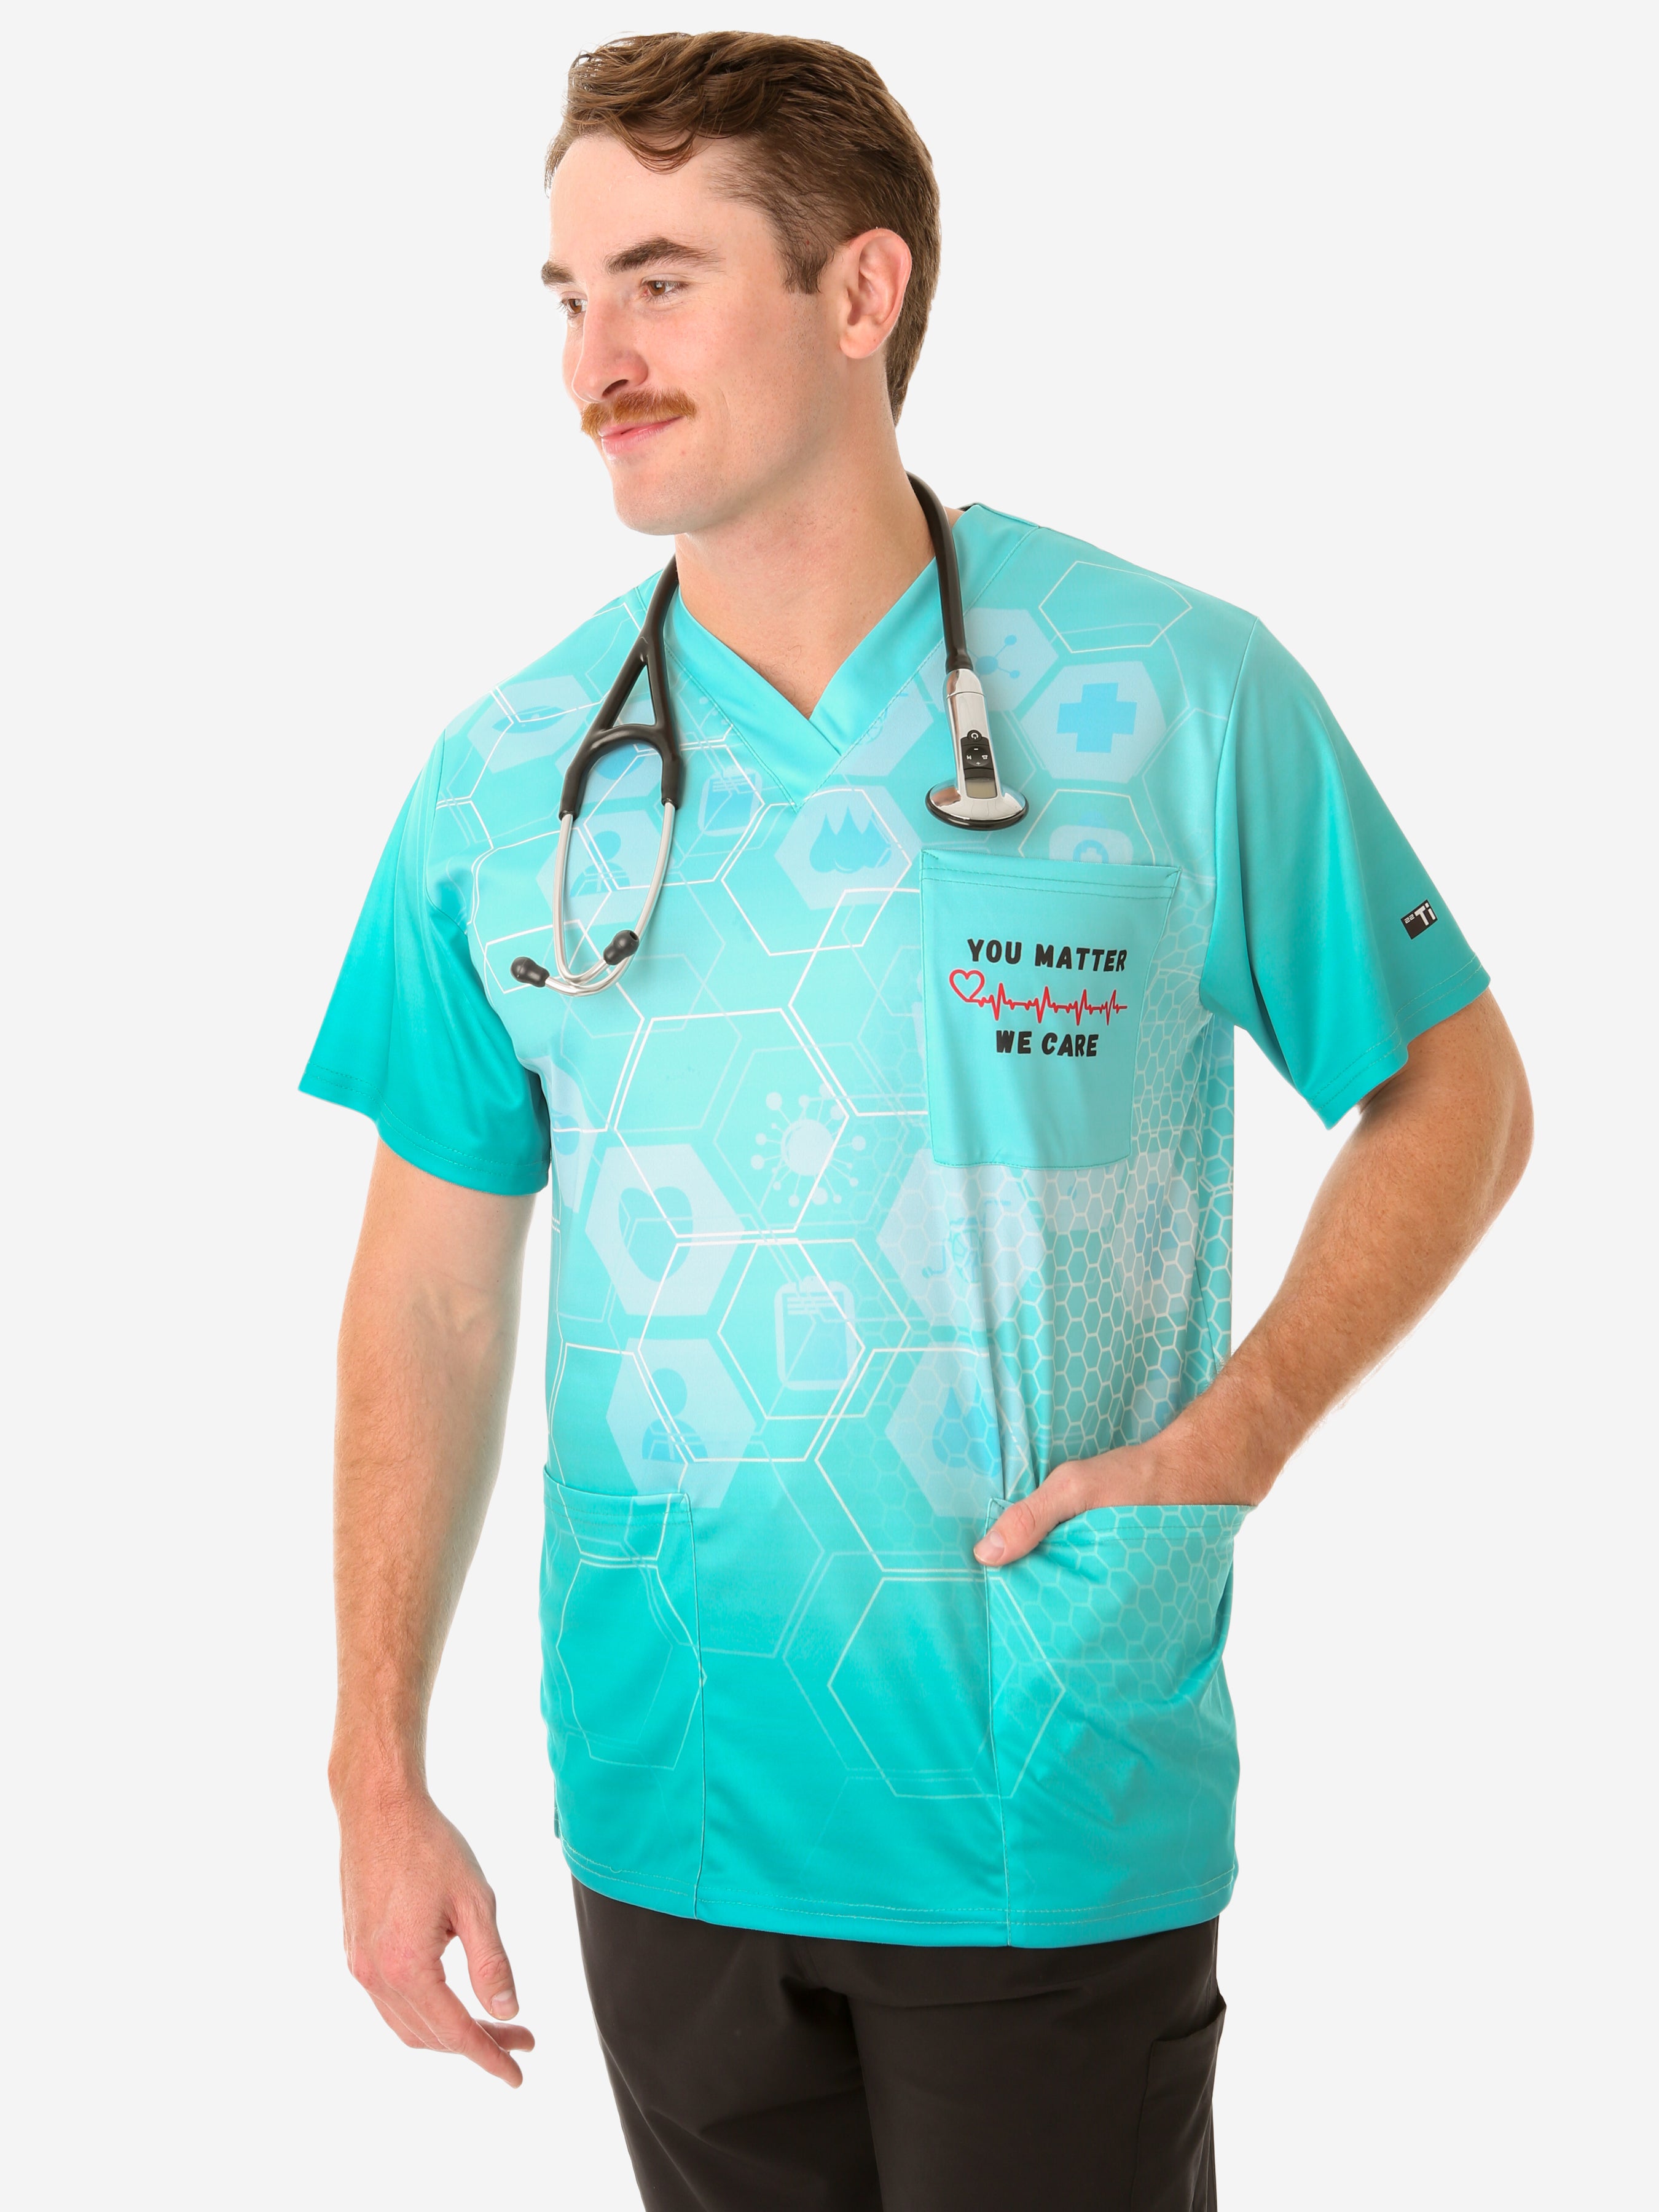 Men's The University of Kansas Health System Scrub Top Design Contest Winner You Matter We Care Top Only Front View Looking to Side